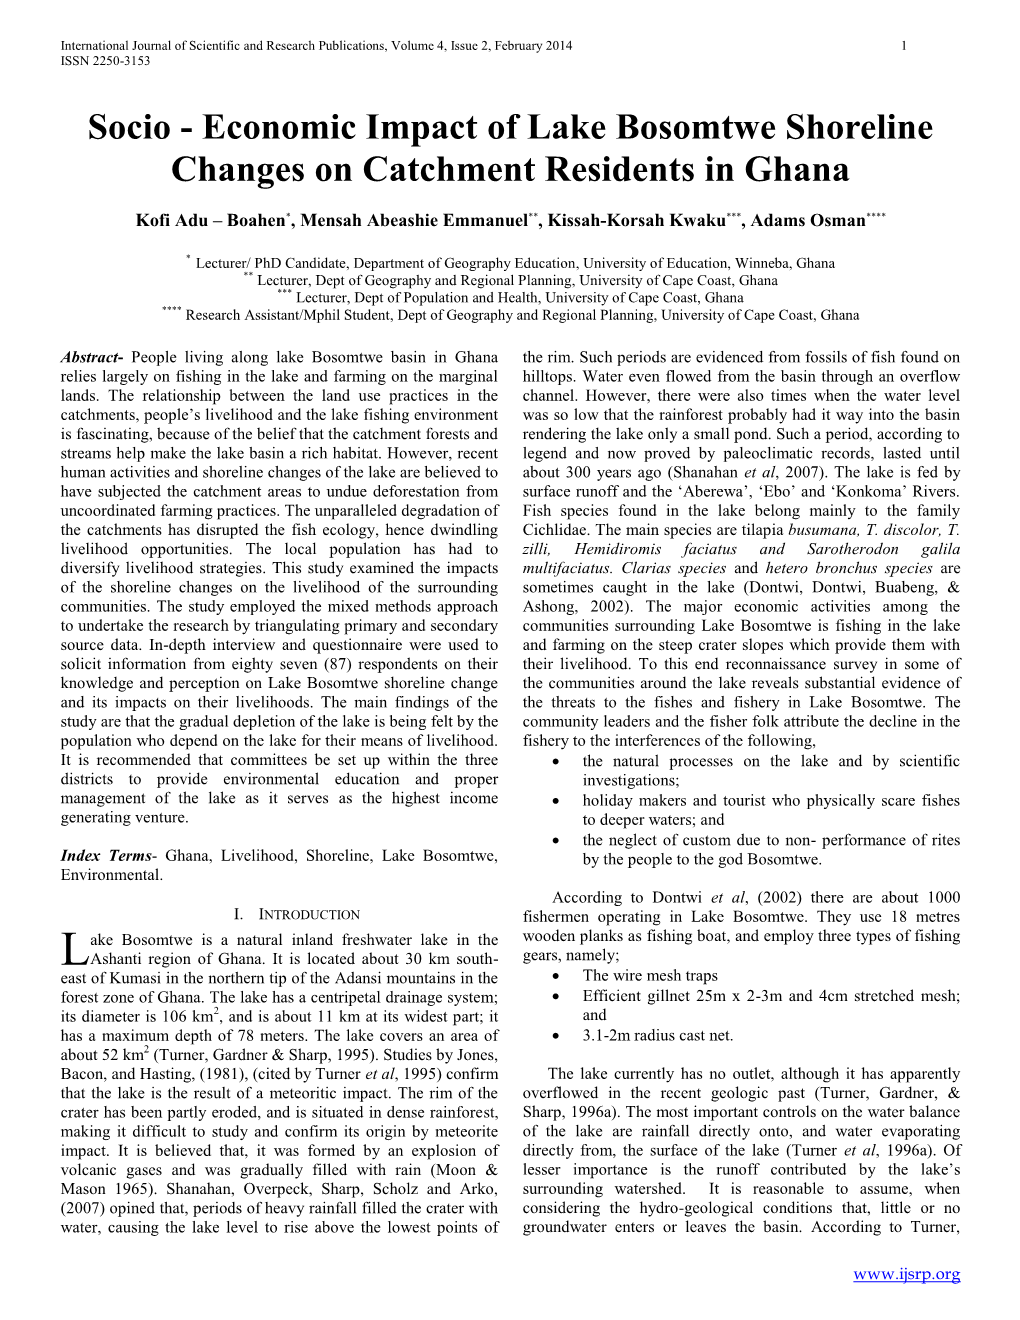 Economic Impact of Lake Bosomtwe Shoreline Changes on Catchment Residents in Ghana